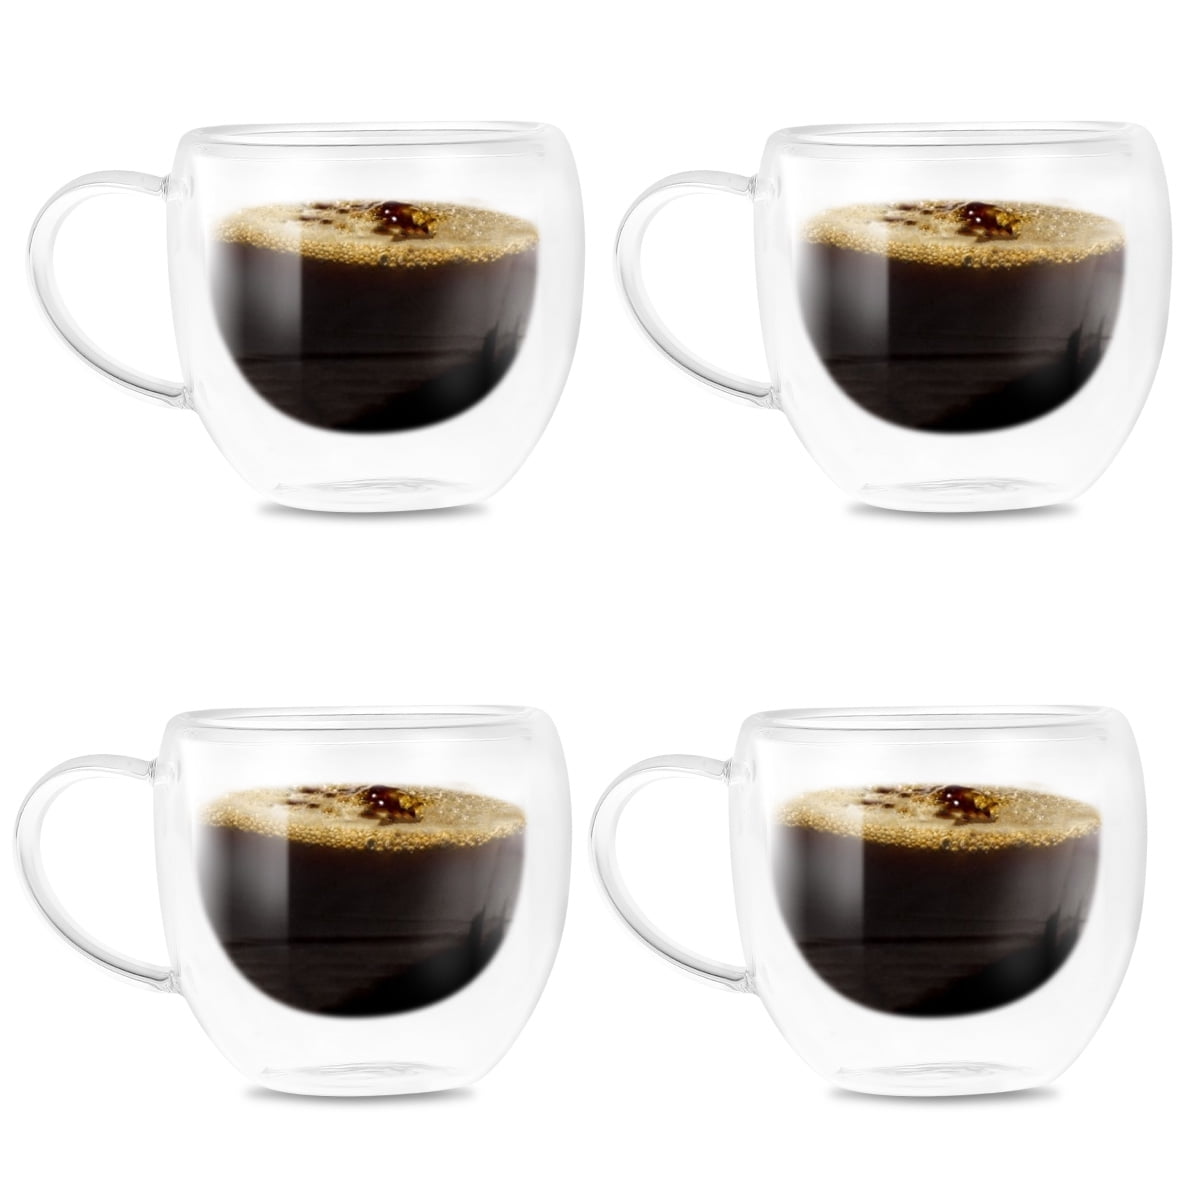 4x Double wall expreso expresso coffee drinking glasses HAND MADE 